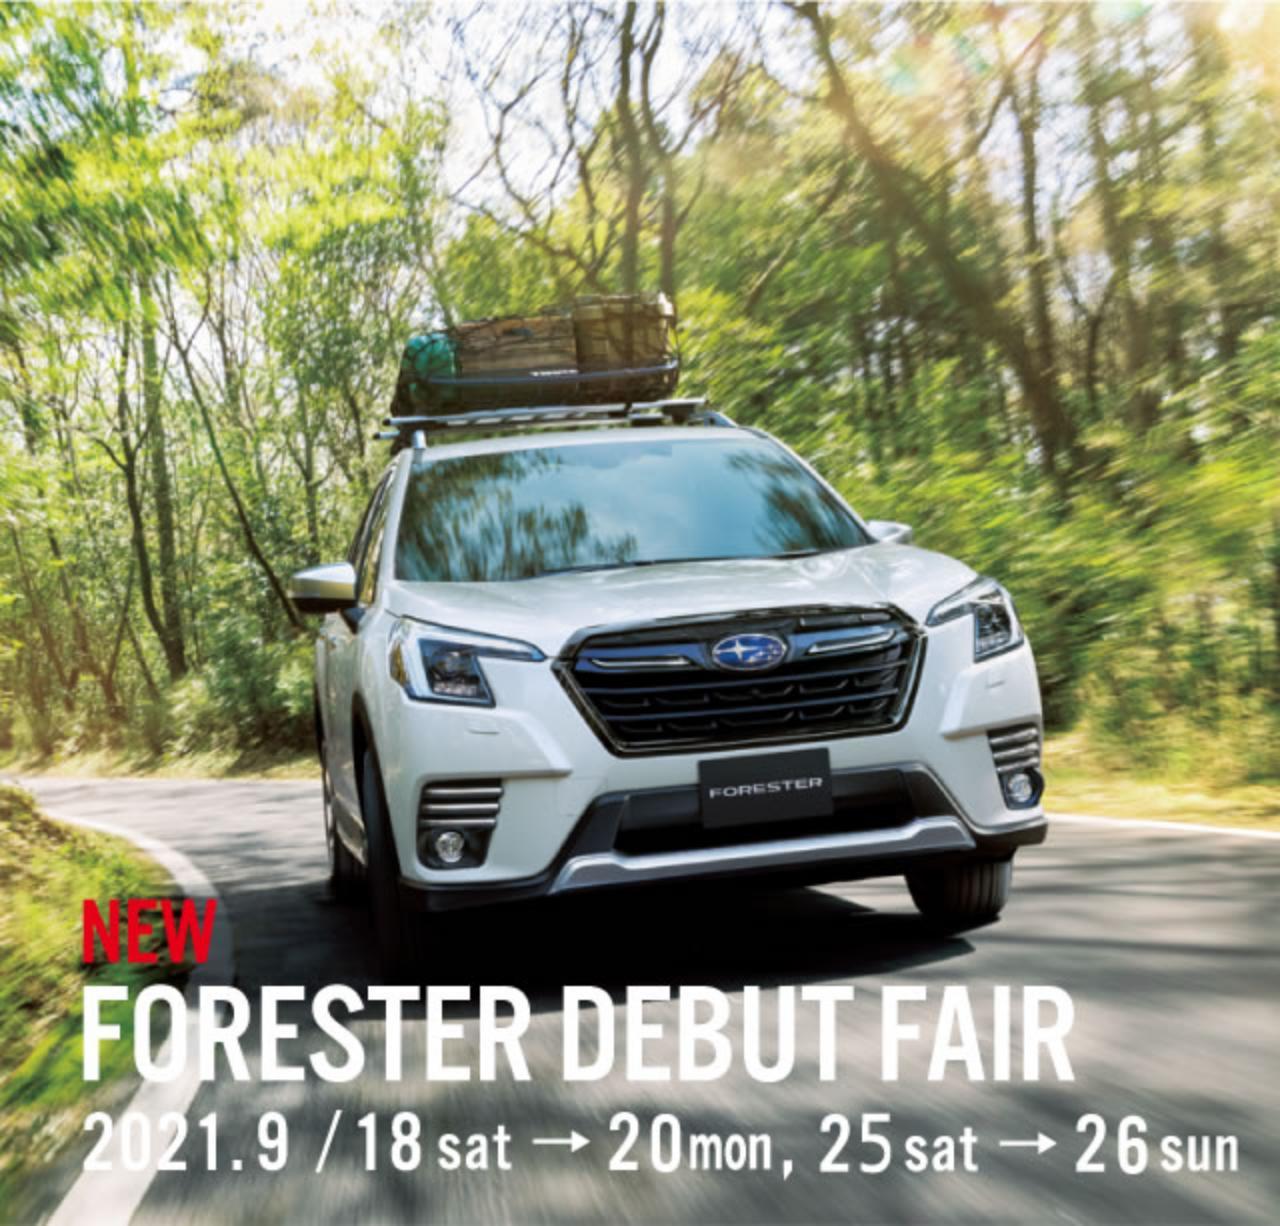 NEW FORESTER DEBUT FAIR